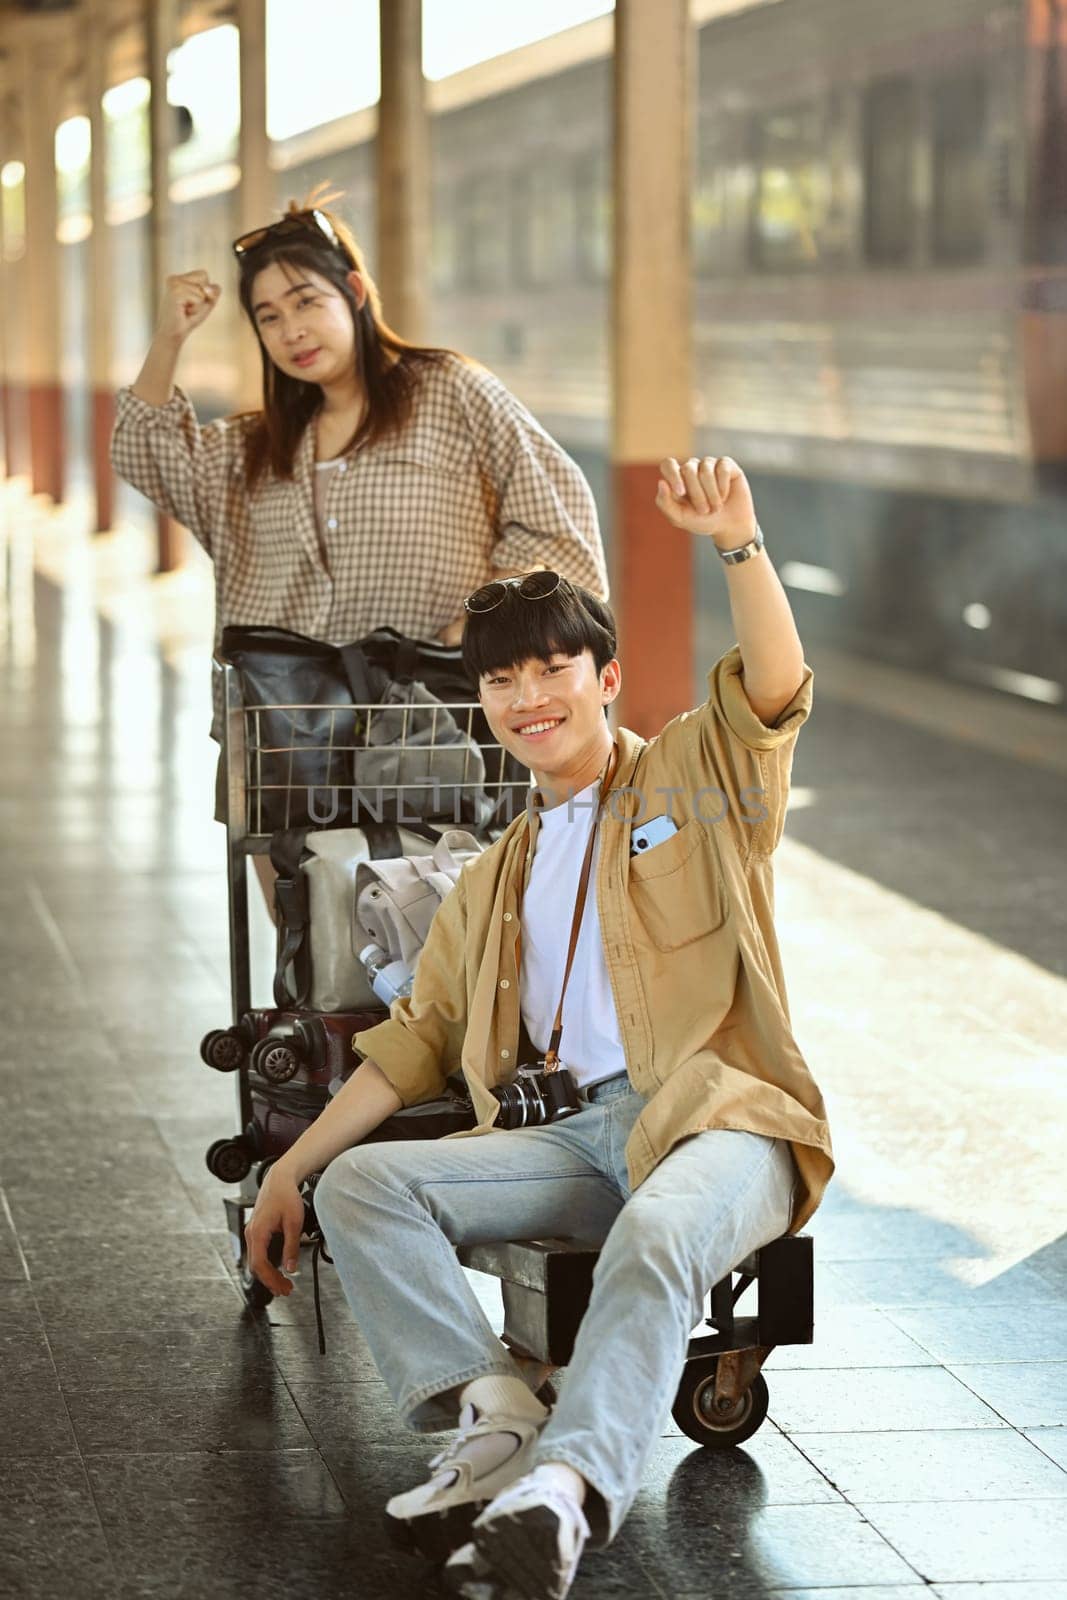 Happy young couple excited about their vacation trip standing in train station. Travel and lifestyle concept by prathanchorruangsak